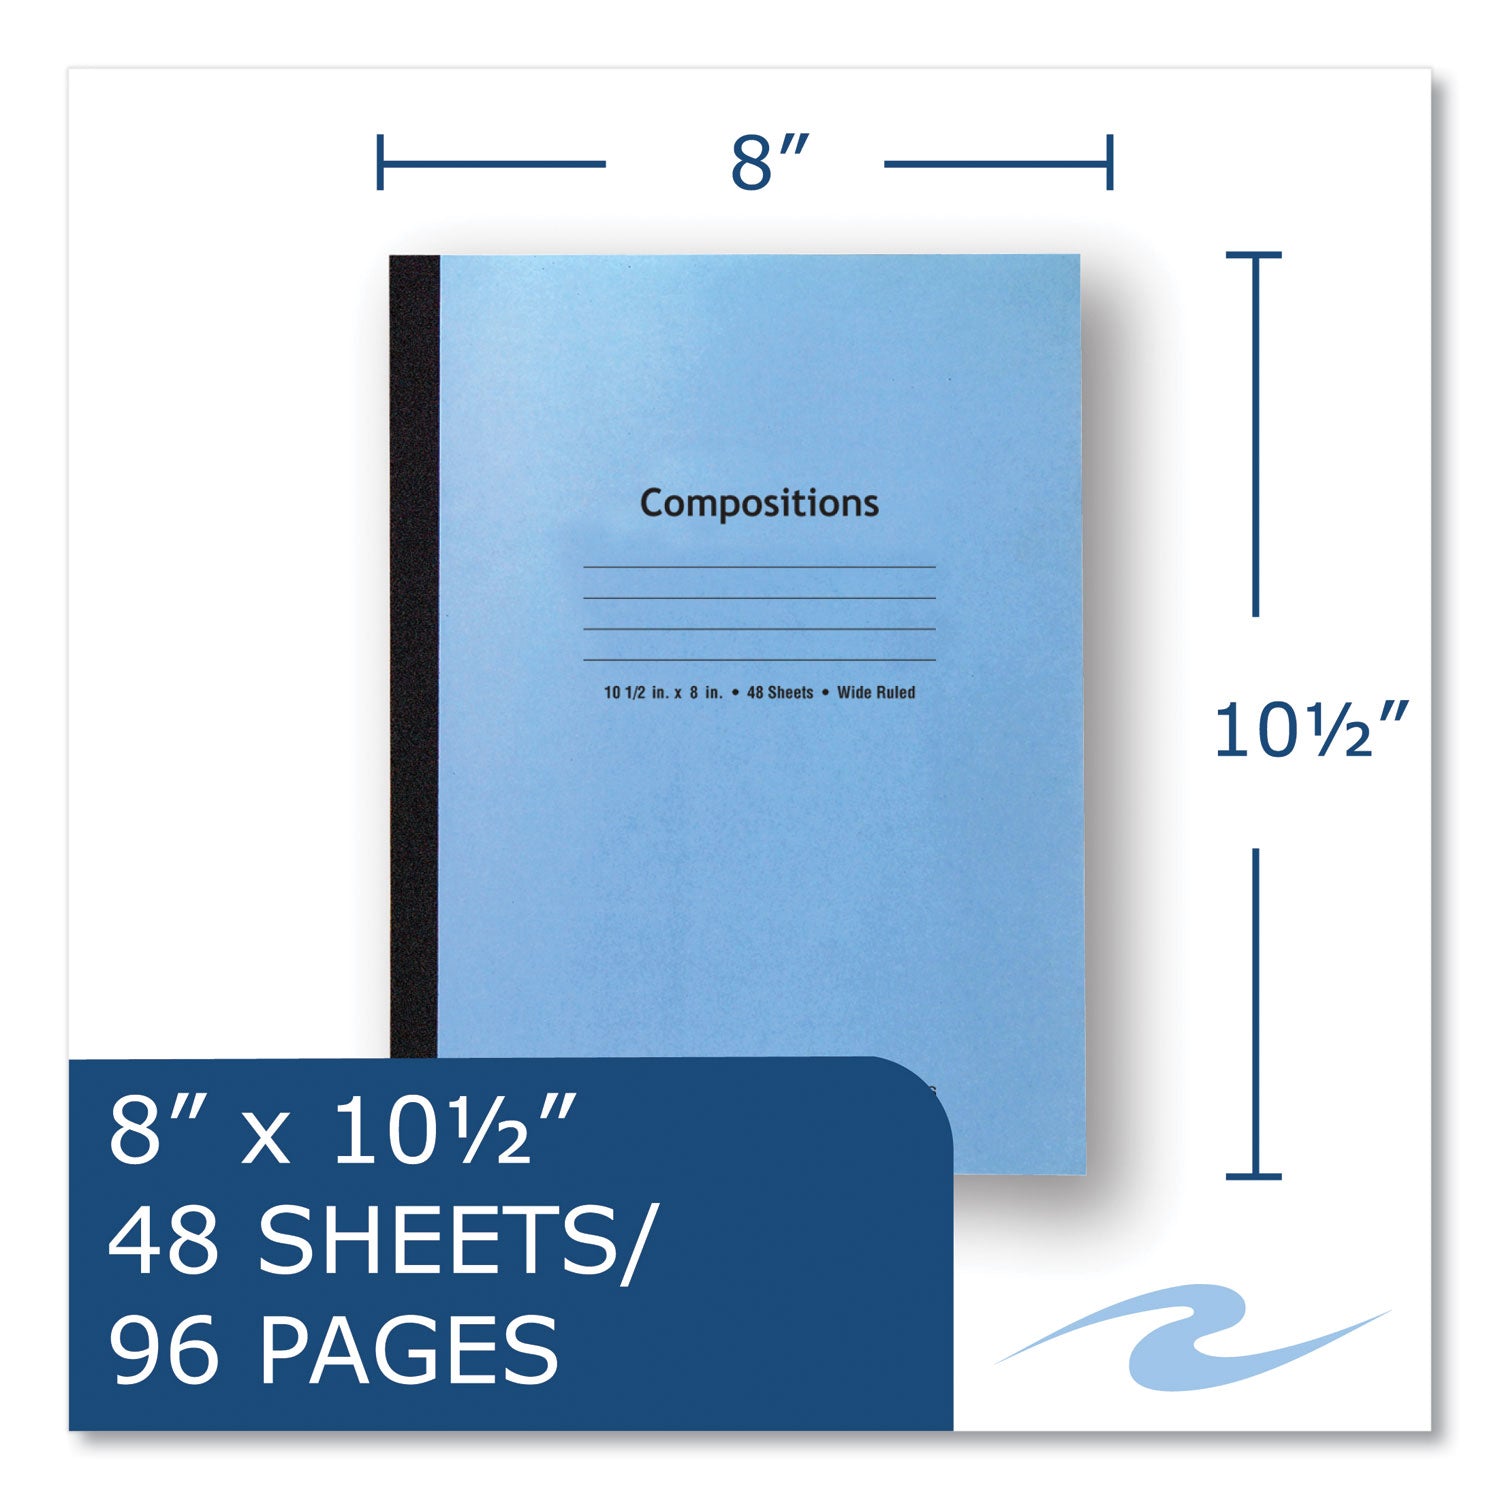 flexible-cover-composition-notebook-wide-legal-rule-blue-cover-48-105-x-8-sheets-72-carton-ships-in-4-6-business-days_roa77501cs - 3